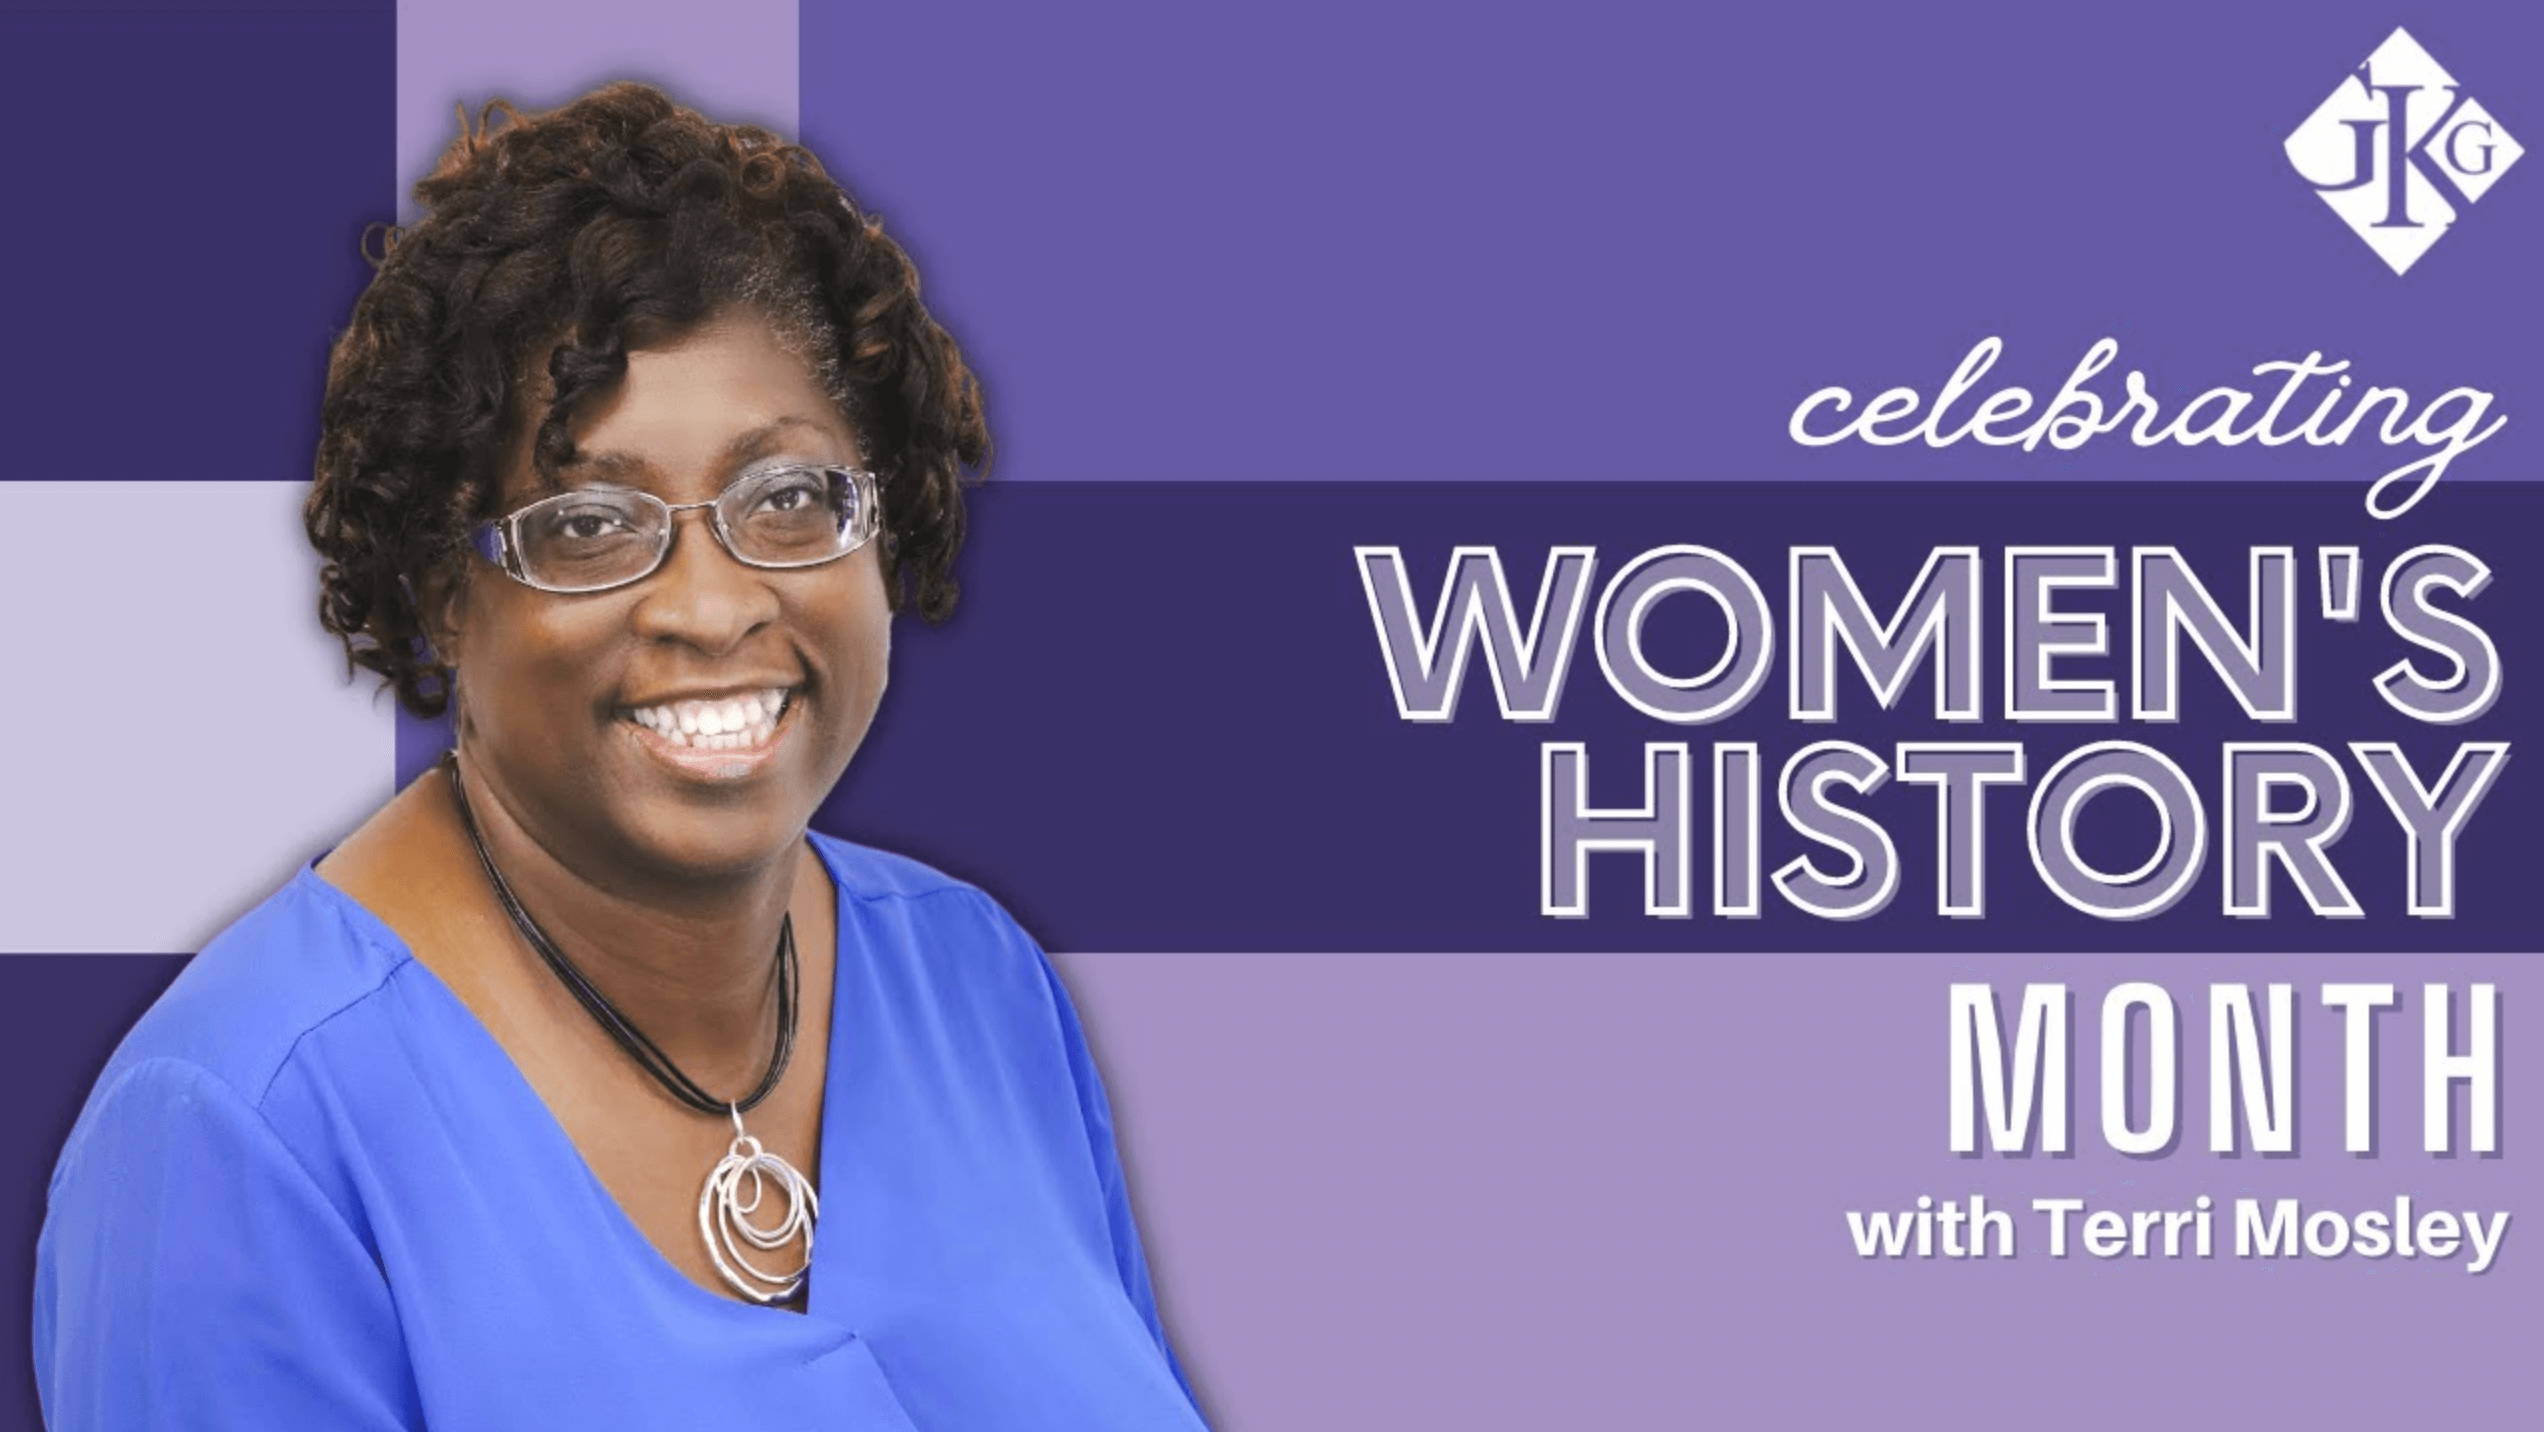 Promotional banner featuring a smiling black woman in blue, captioned "celebrating women's history month with Terri Mosley" against a purple and white background, highlighting her contributions to Human Resources